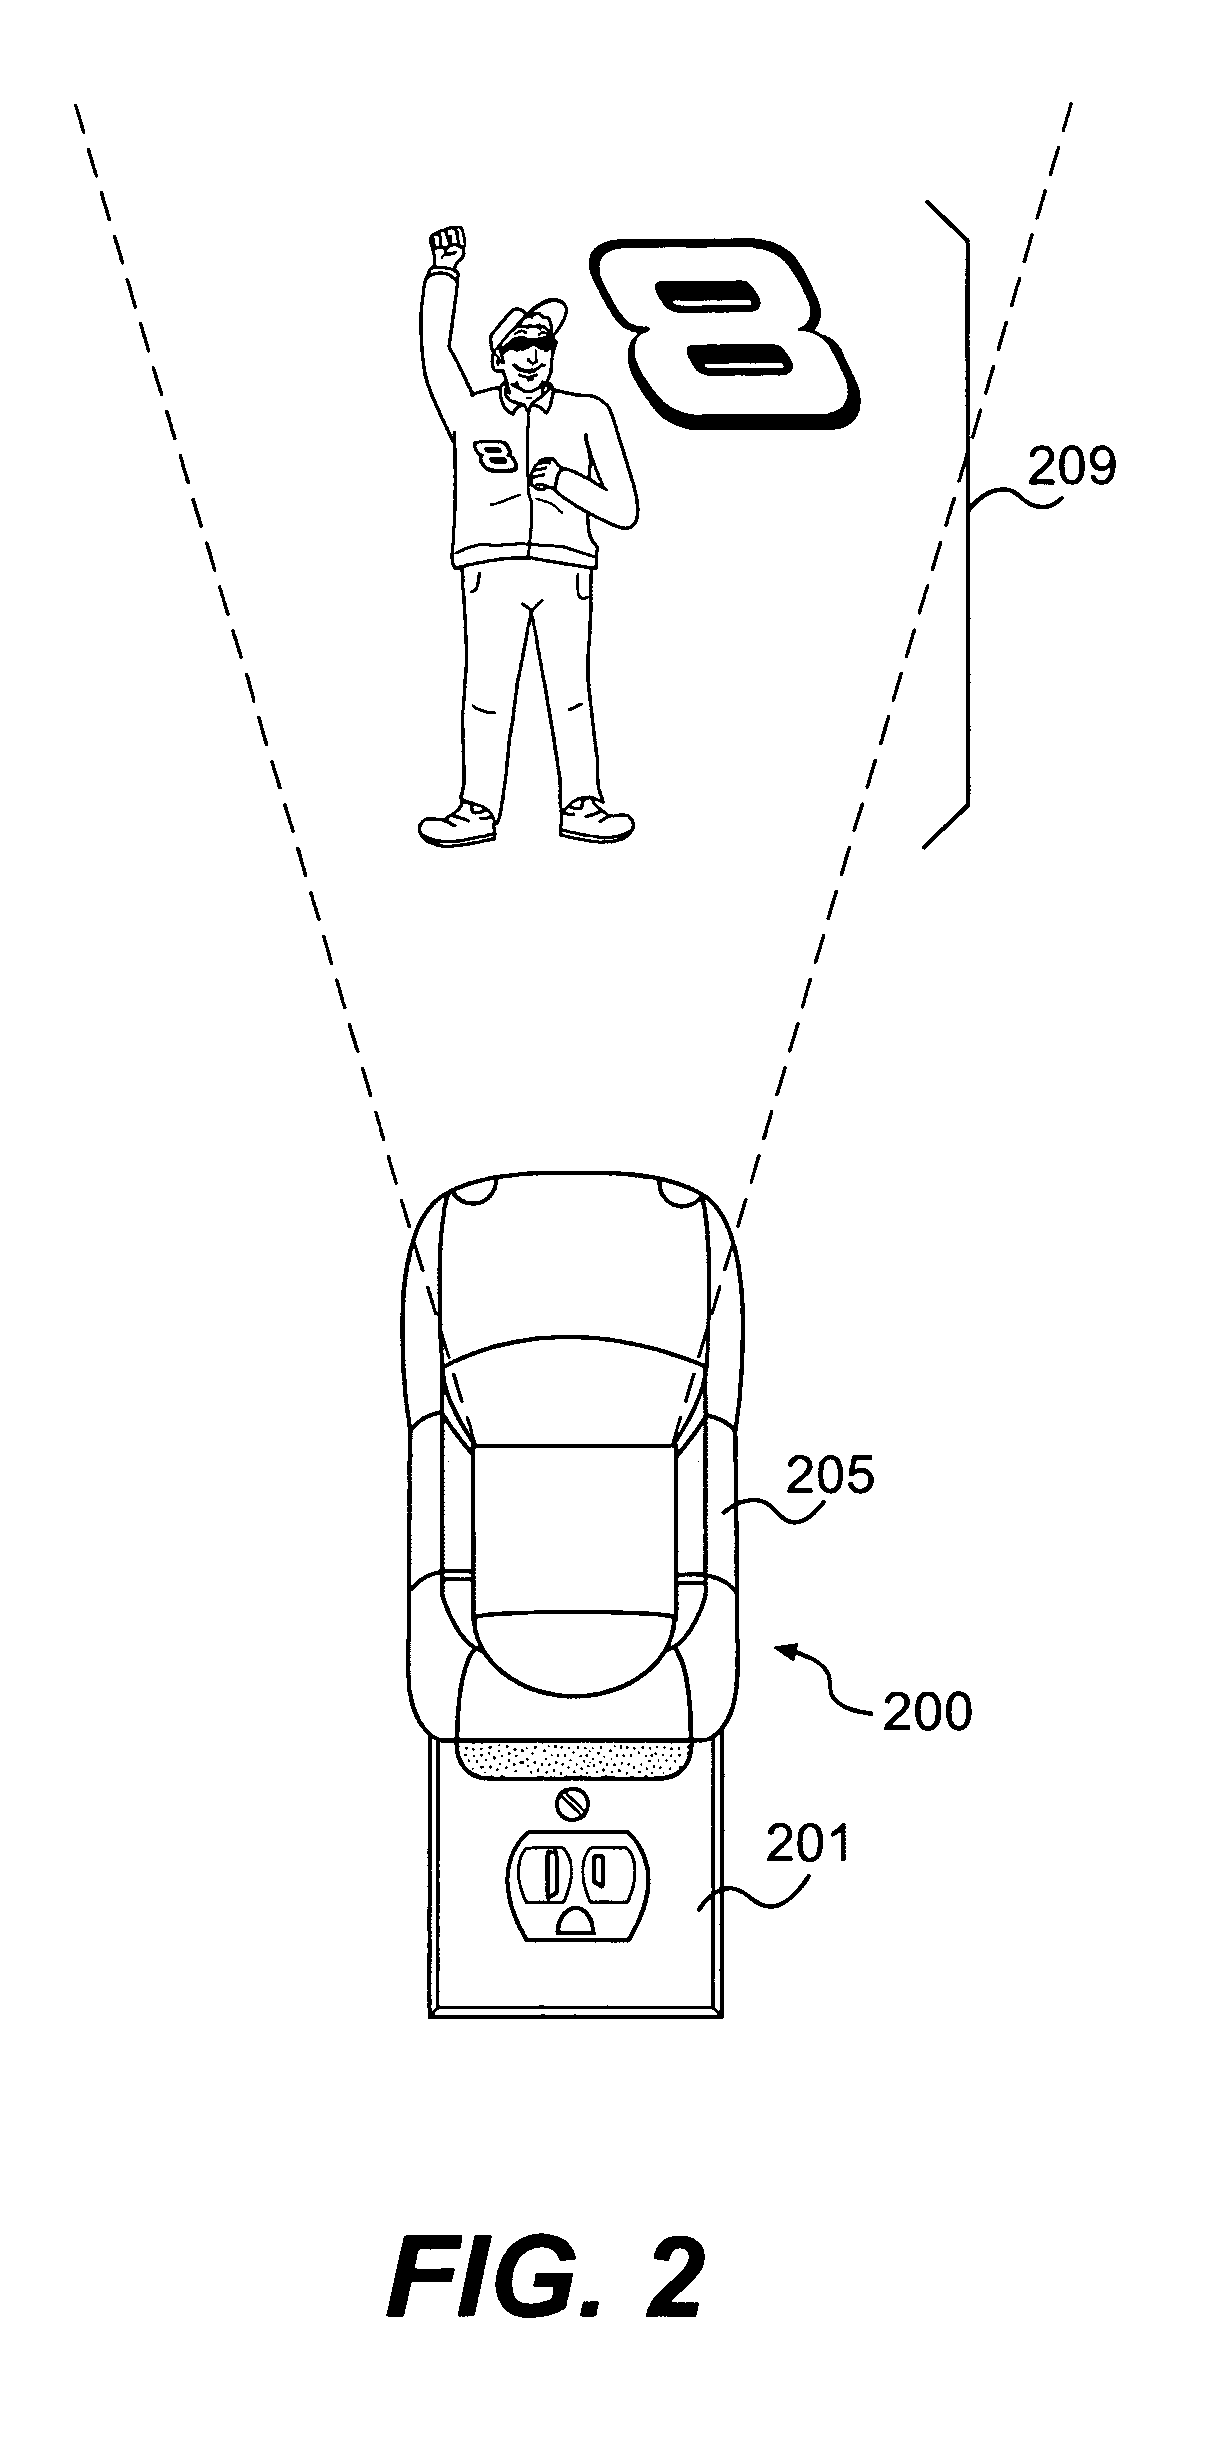 Image projector display device